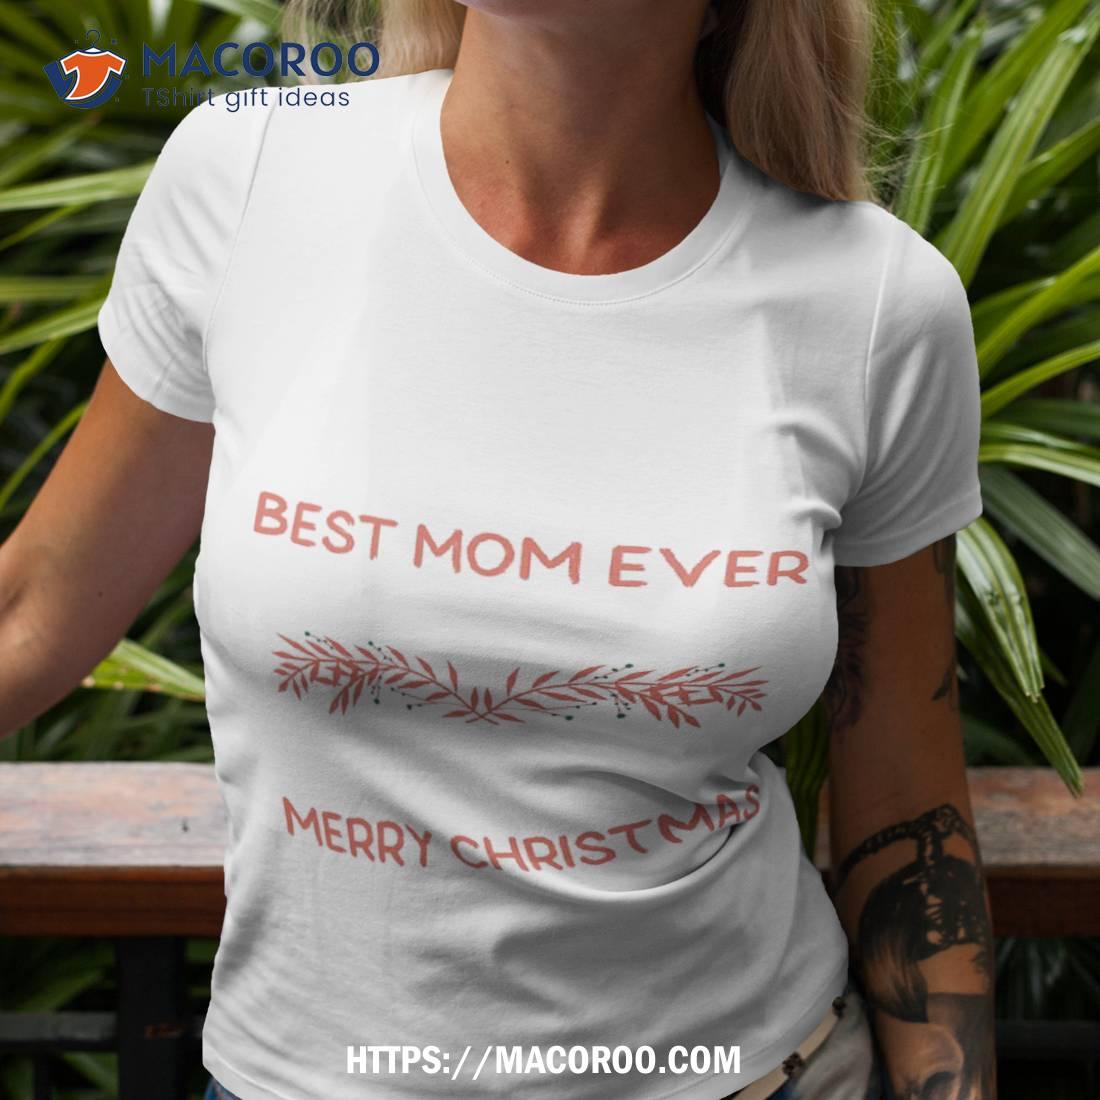 https://images.macoroo.com/wp-content/uploads/2023/08/best-mom-ever-merry-christmas-shirt-good-christmas-gifts-for-your-mom-tshirt-3.jpg